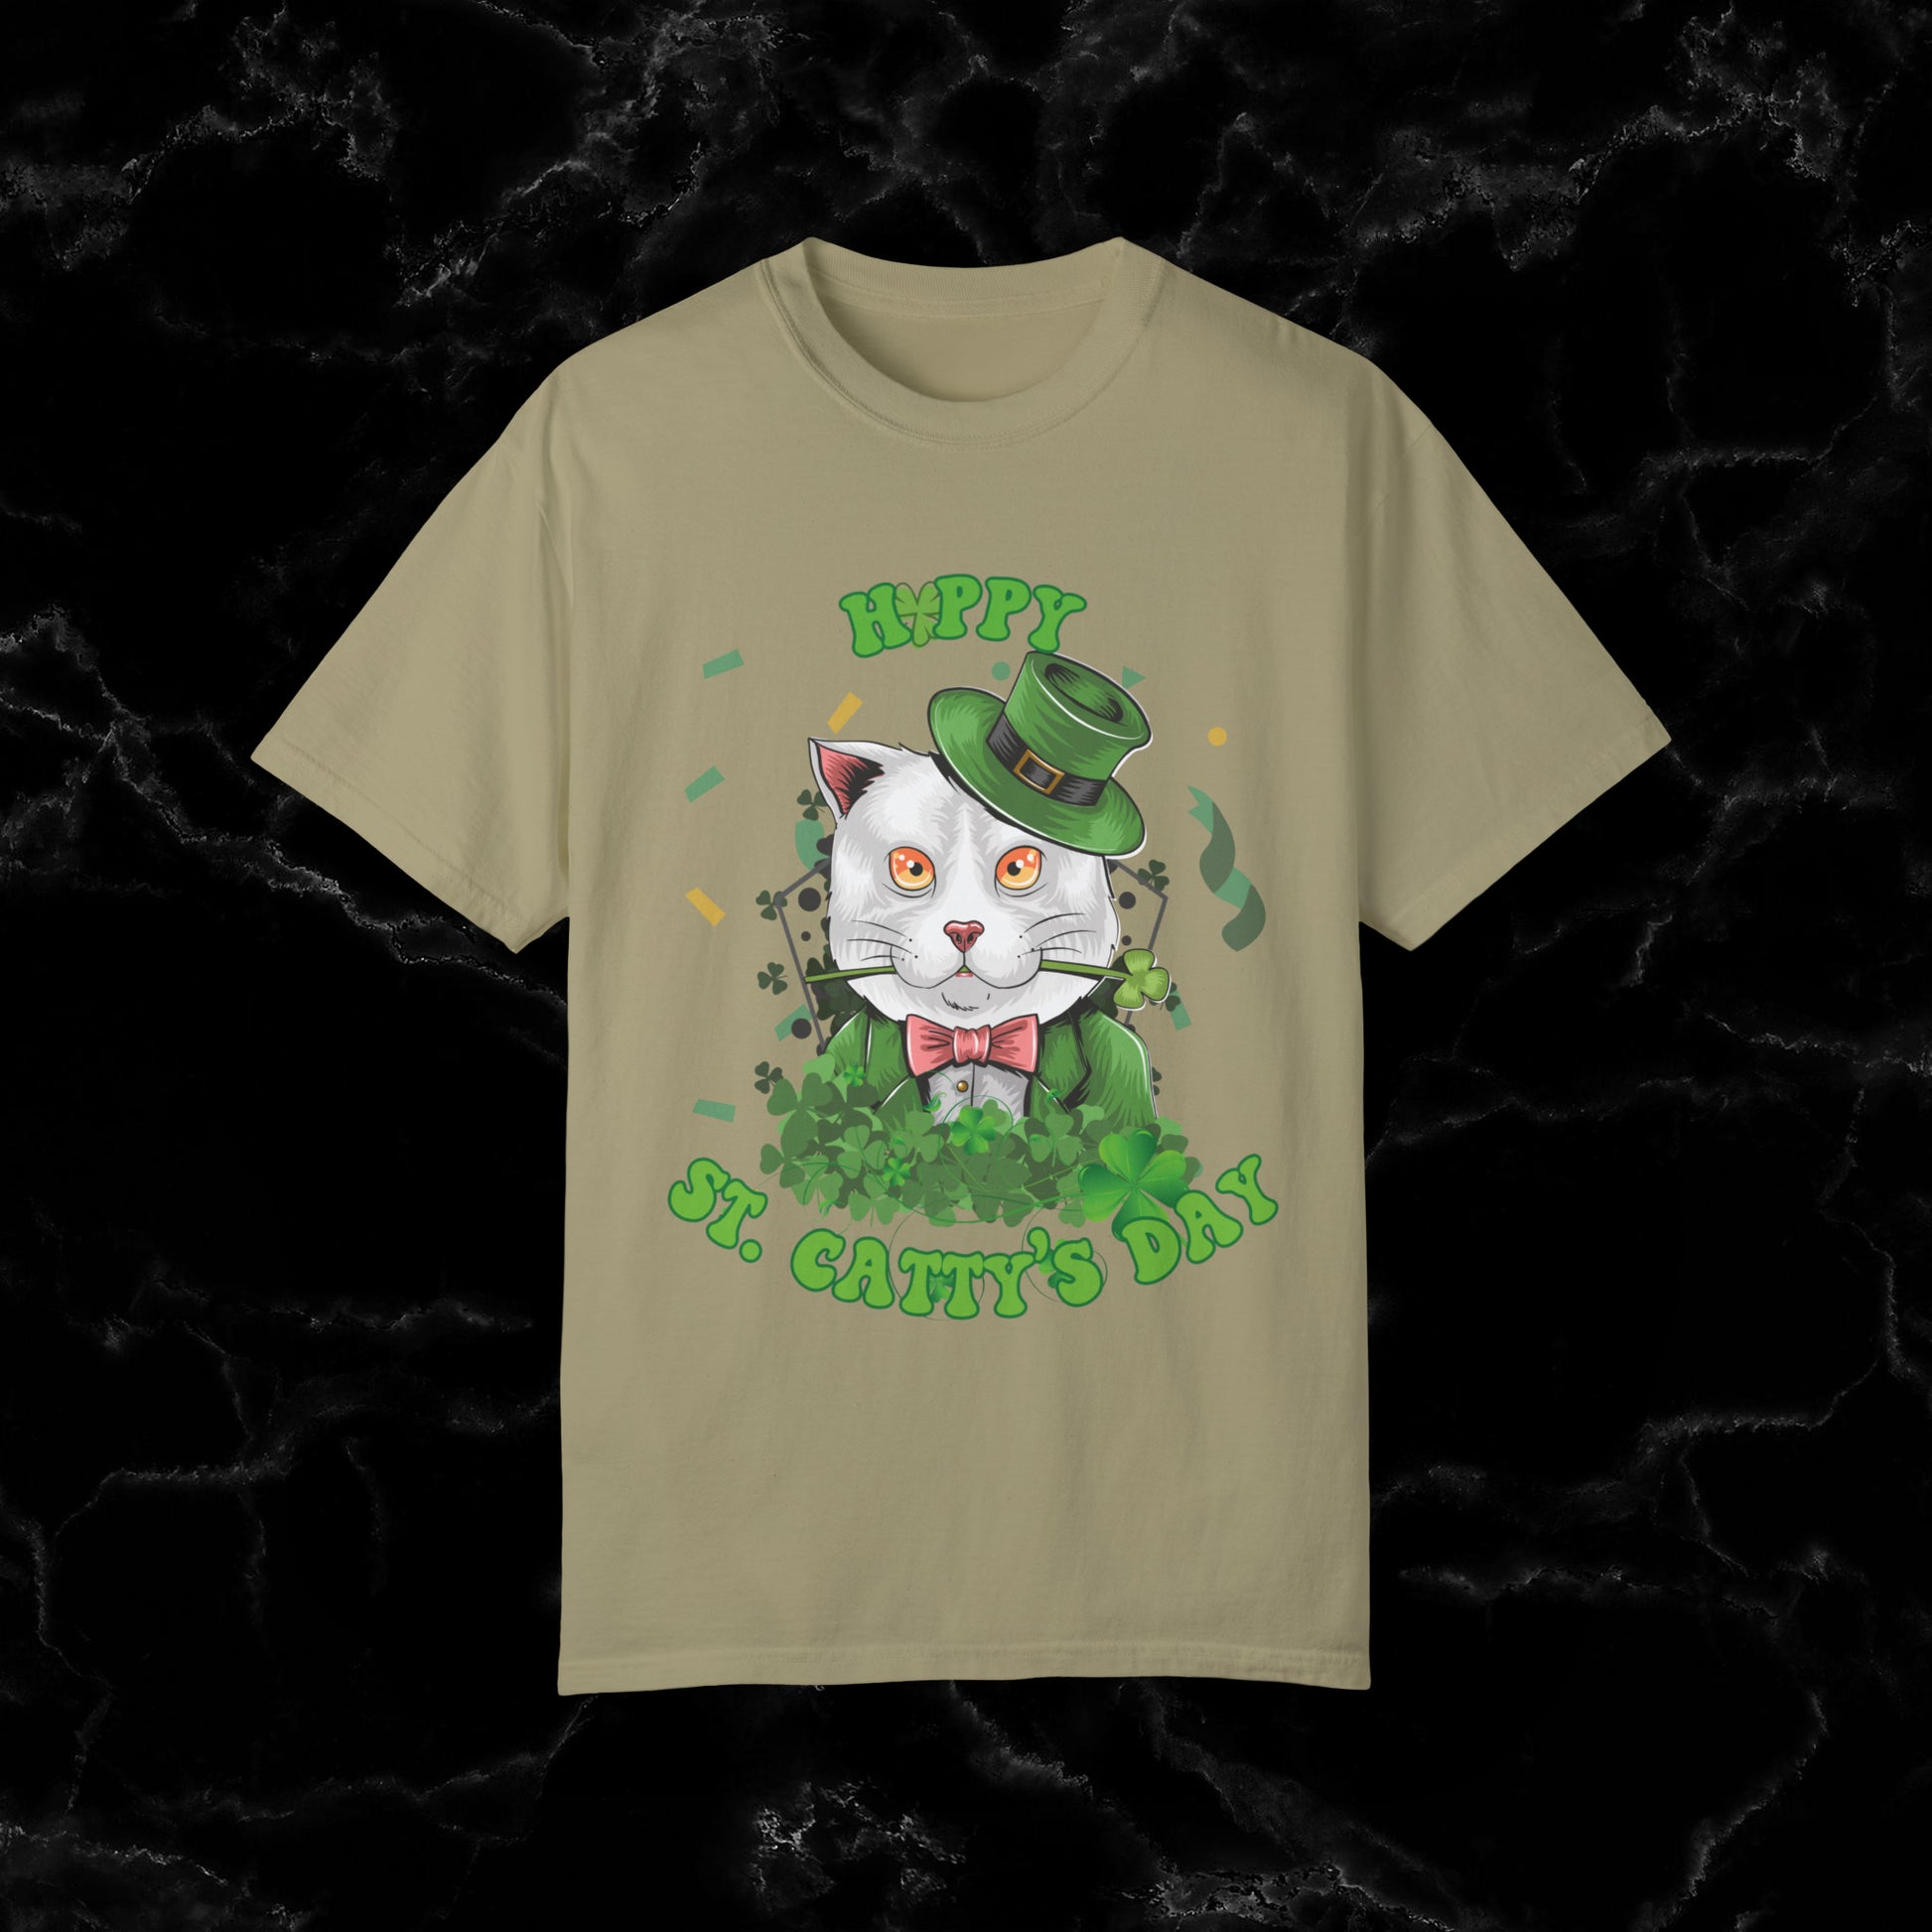 Happy St. Catty's Day Funny St. Patrick's Day Comfort Colors T-Shirt - St. Paddy's Day Shirt for Cat Lover St. Patty's Day Fun T-Shirt Khaki S 